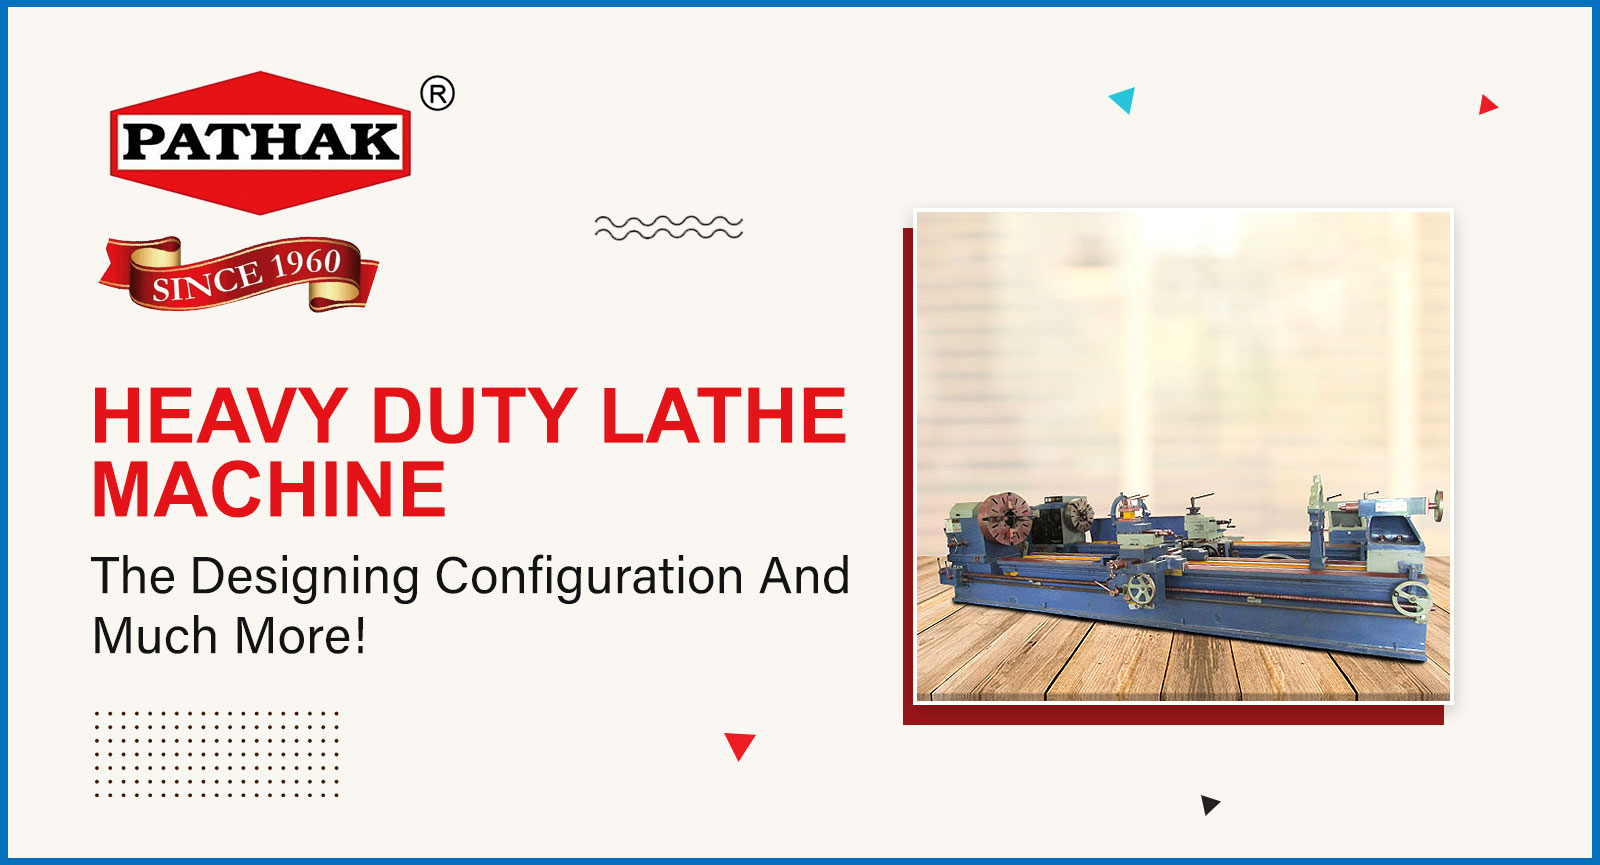 Heavy Duty Lathe Machine: The Designing Configuration And Much